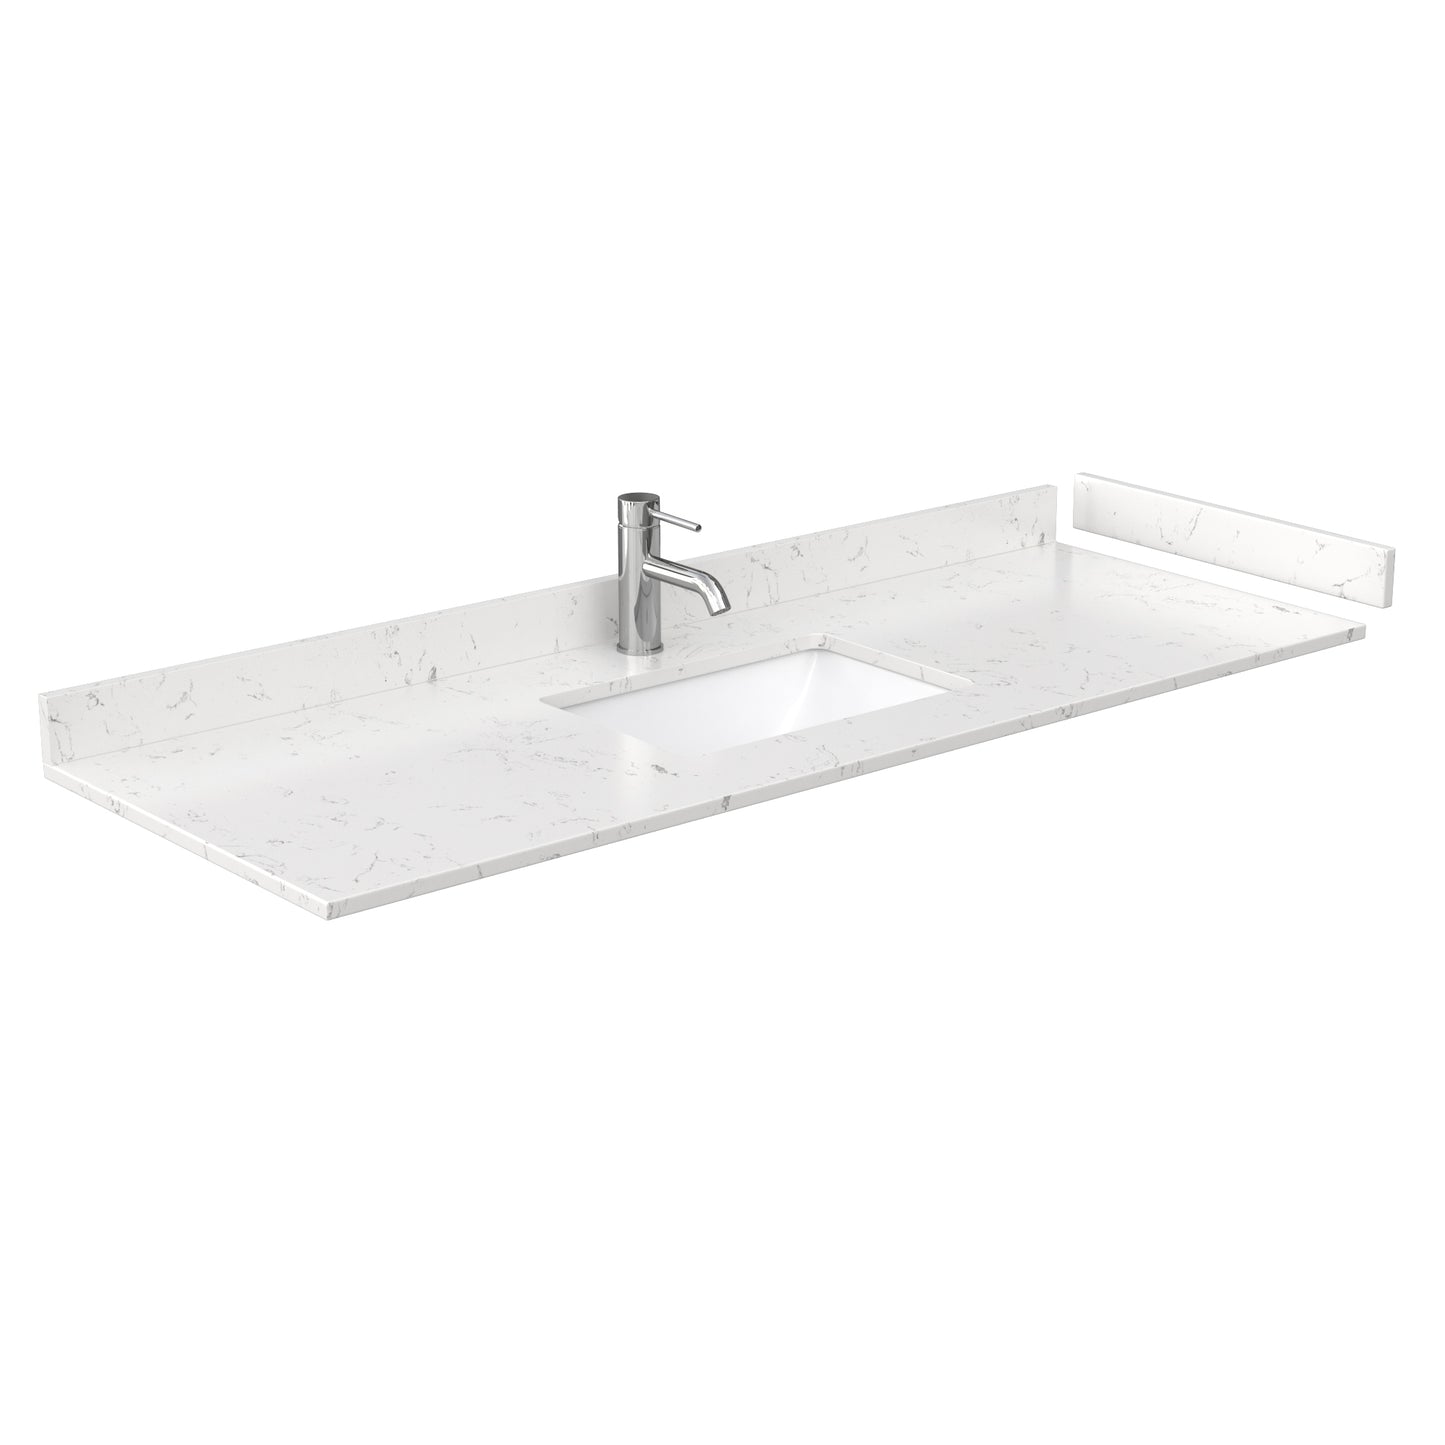 Wyndham Icon 60 Inch Single Bathroom Vanity in White with Carrara Cultured Marble Countertop, Undermount Square Sink and Satin Bronze Trim - Luxe Bathroom Vanities